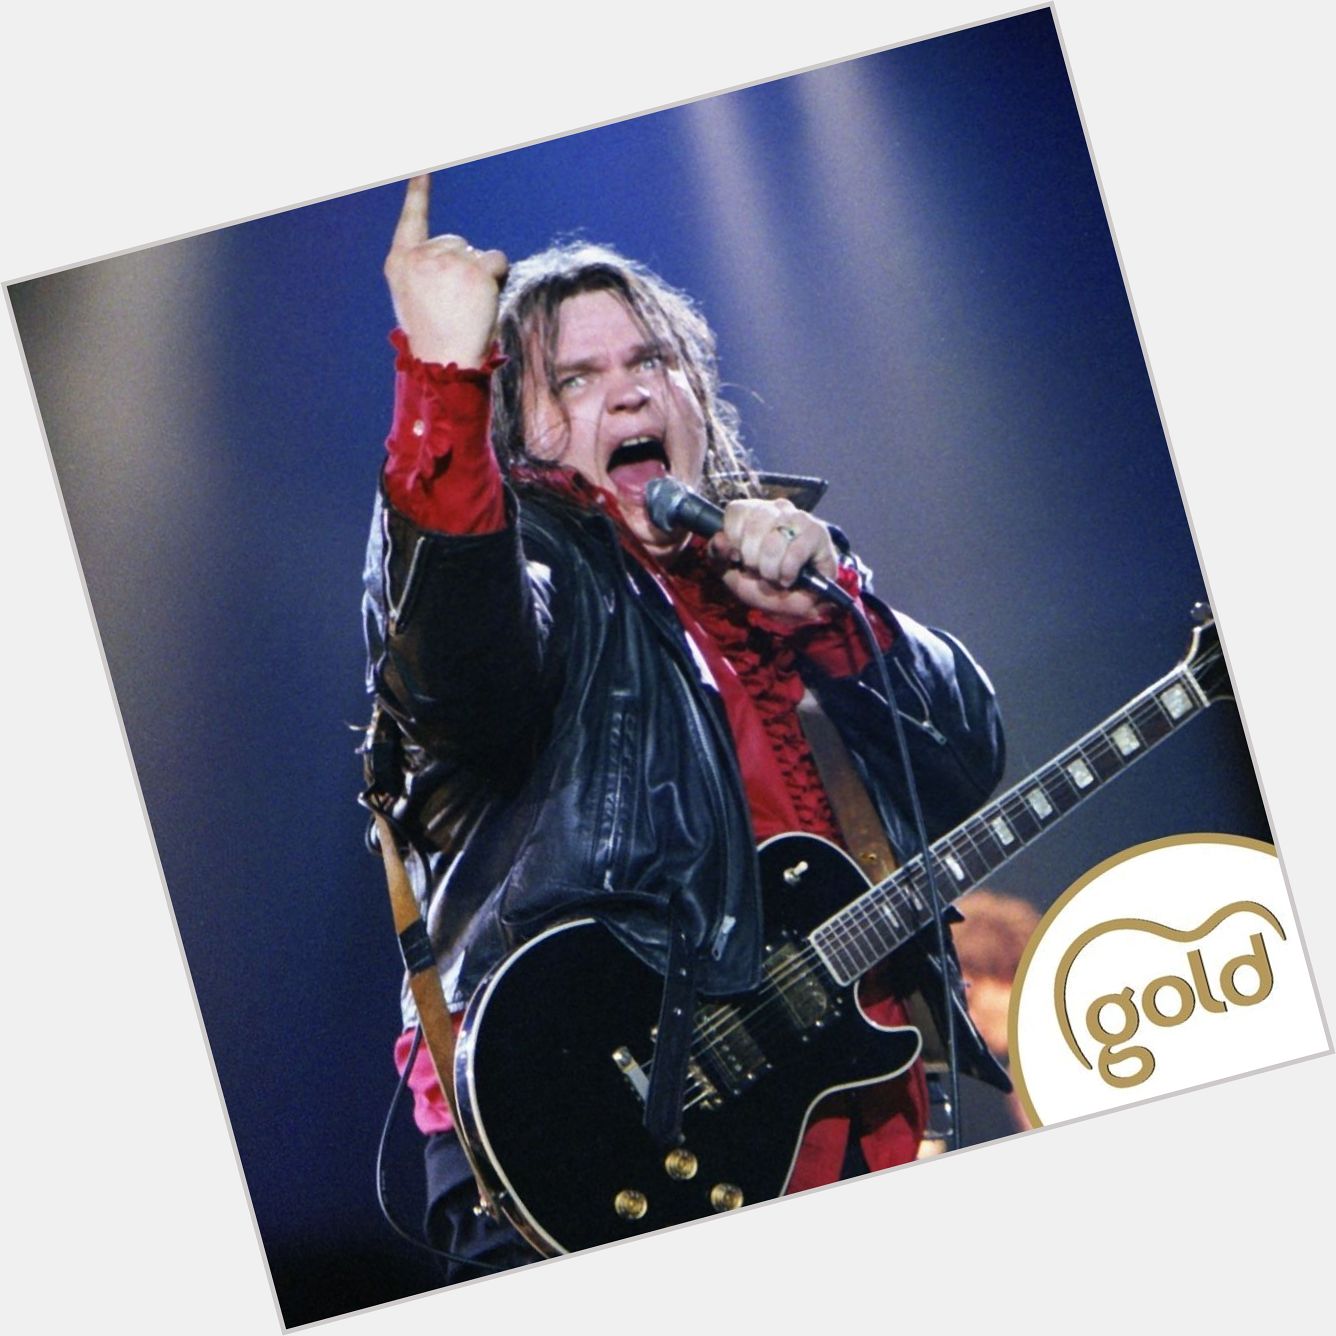 Happy birthday Meat Loaf! The singer turns 74 today. 